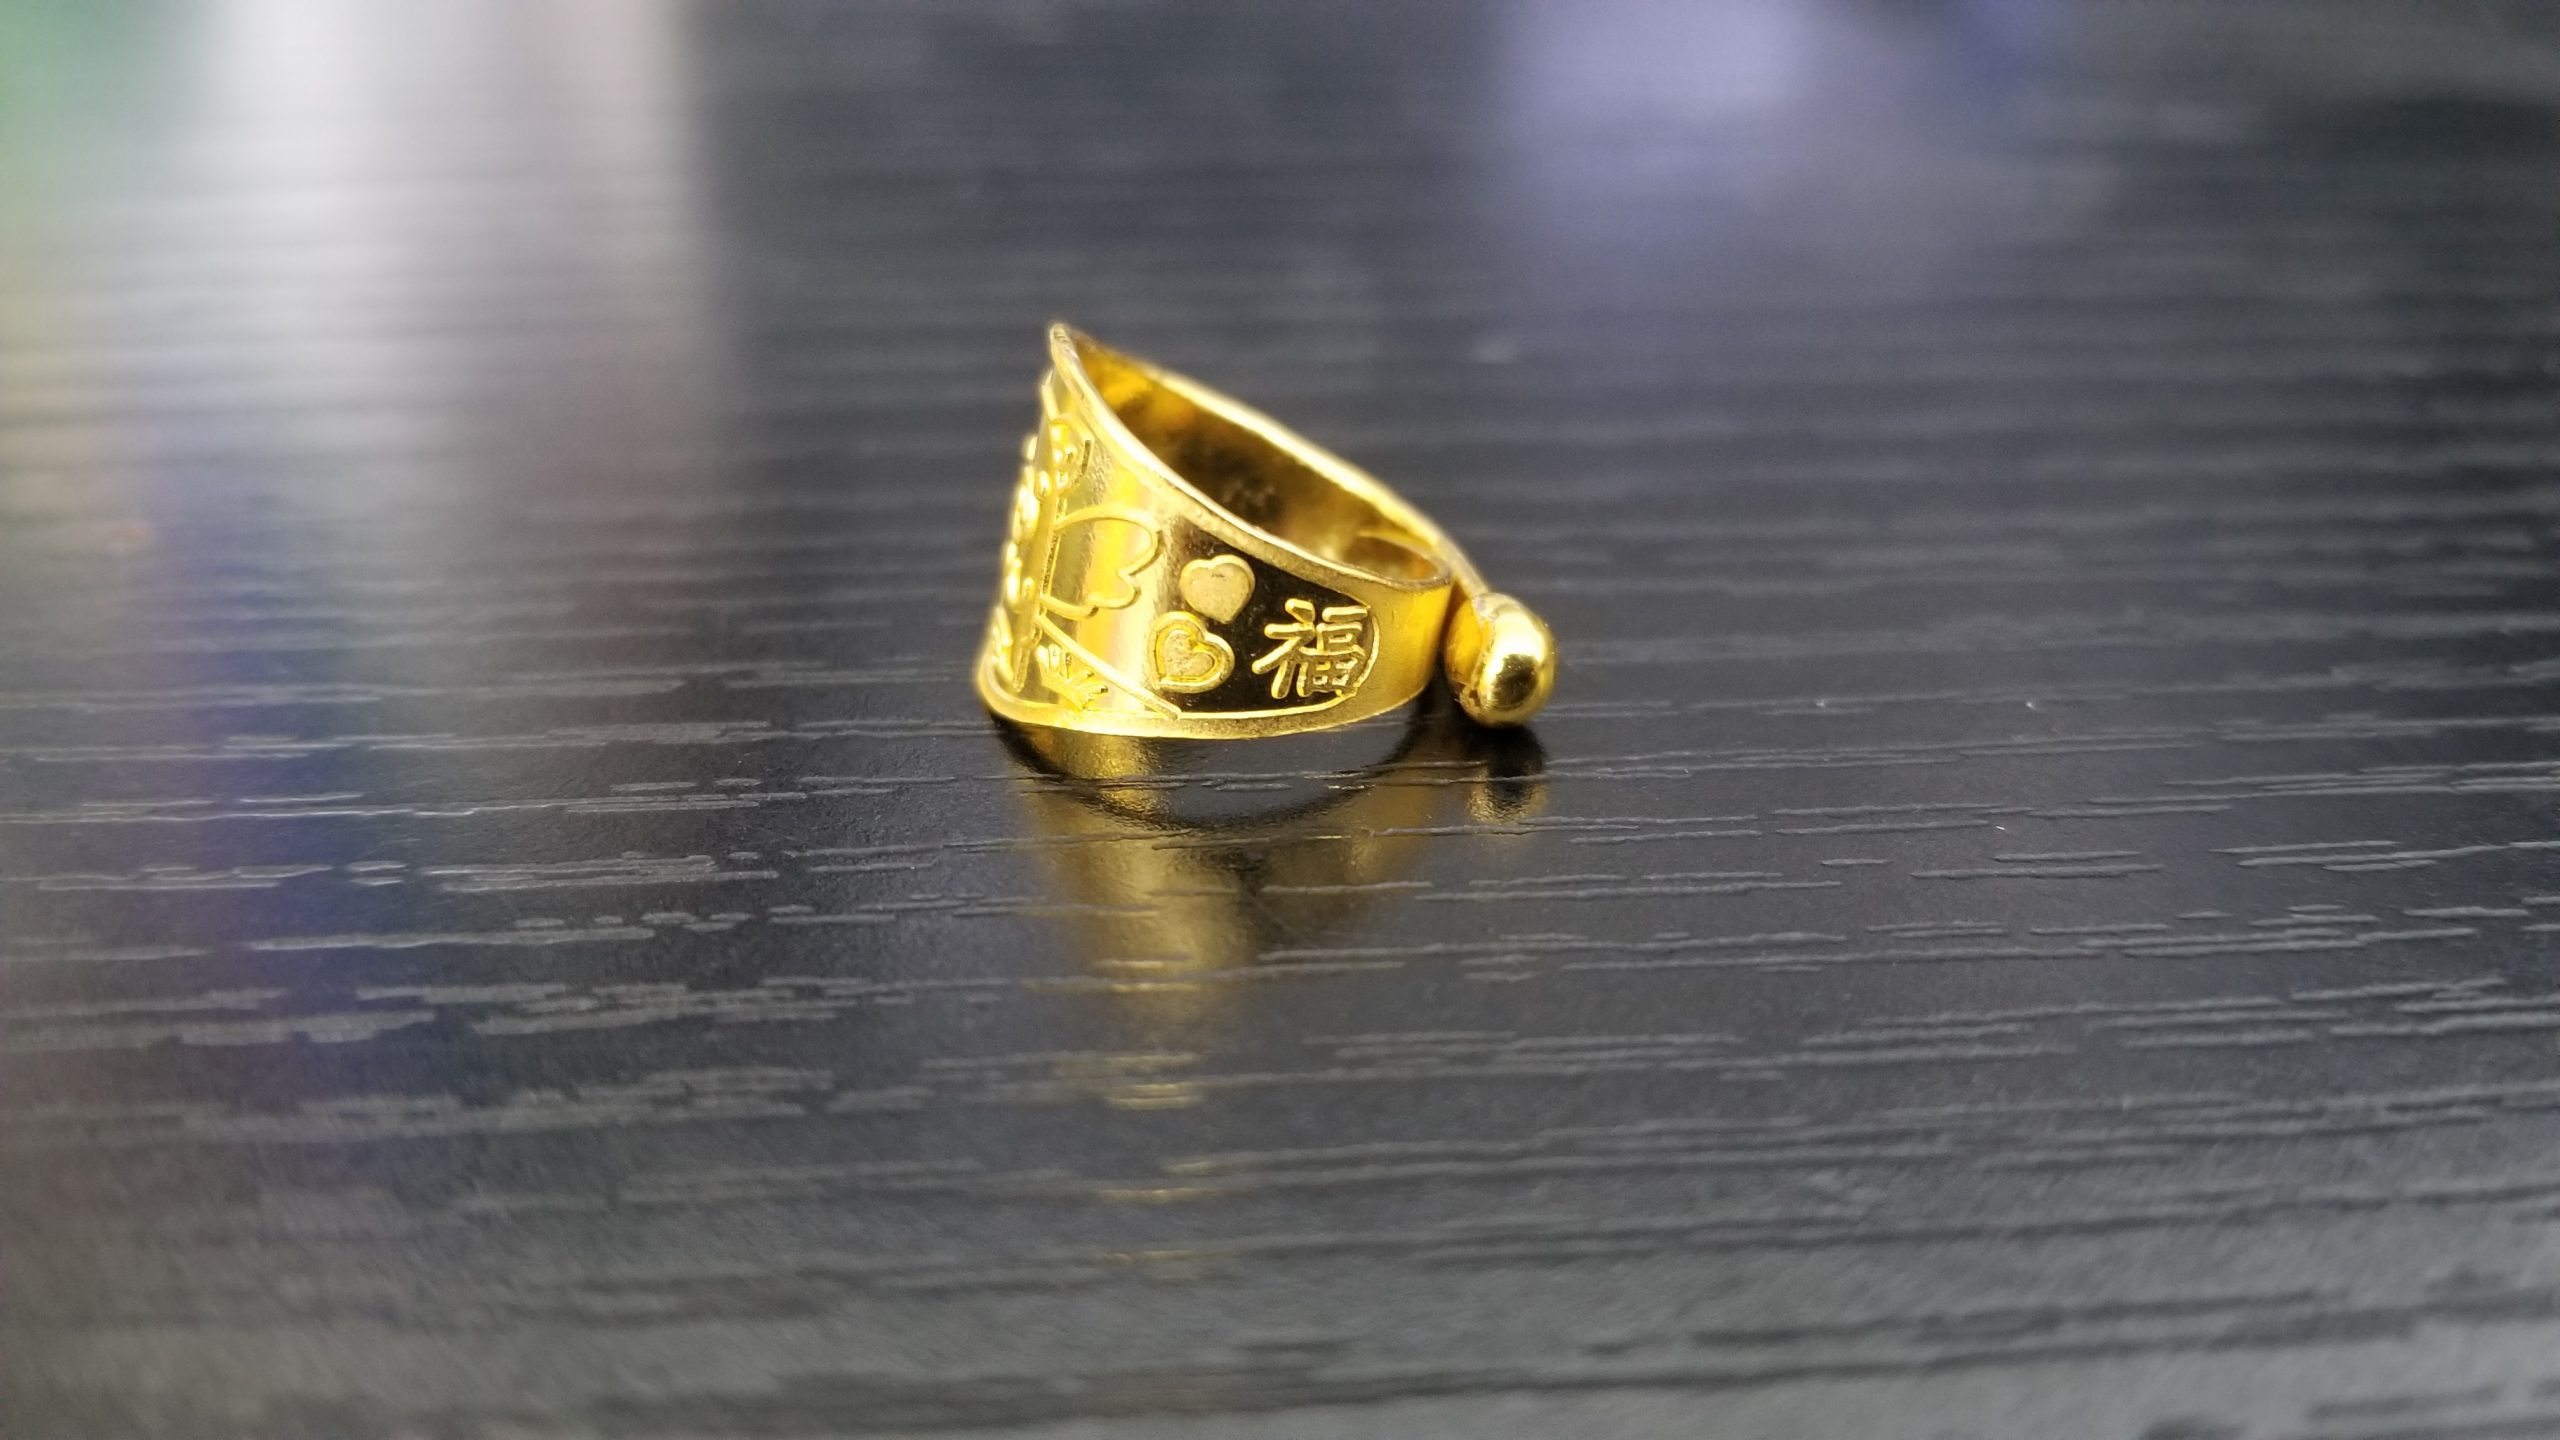 Gold Arabic Name Ring, Arabic Letter Ring, Personalized Ring, Islamic  Gifts, Arabic Jewelry, Gift for Her, Birthday Gifts, XW84 - Etsy | Bague  prénom, Bijoux arabe, Bague